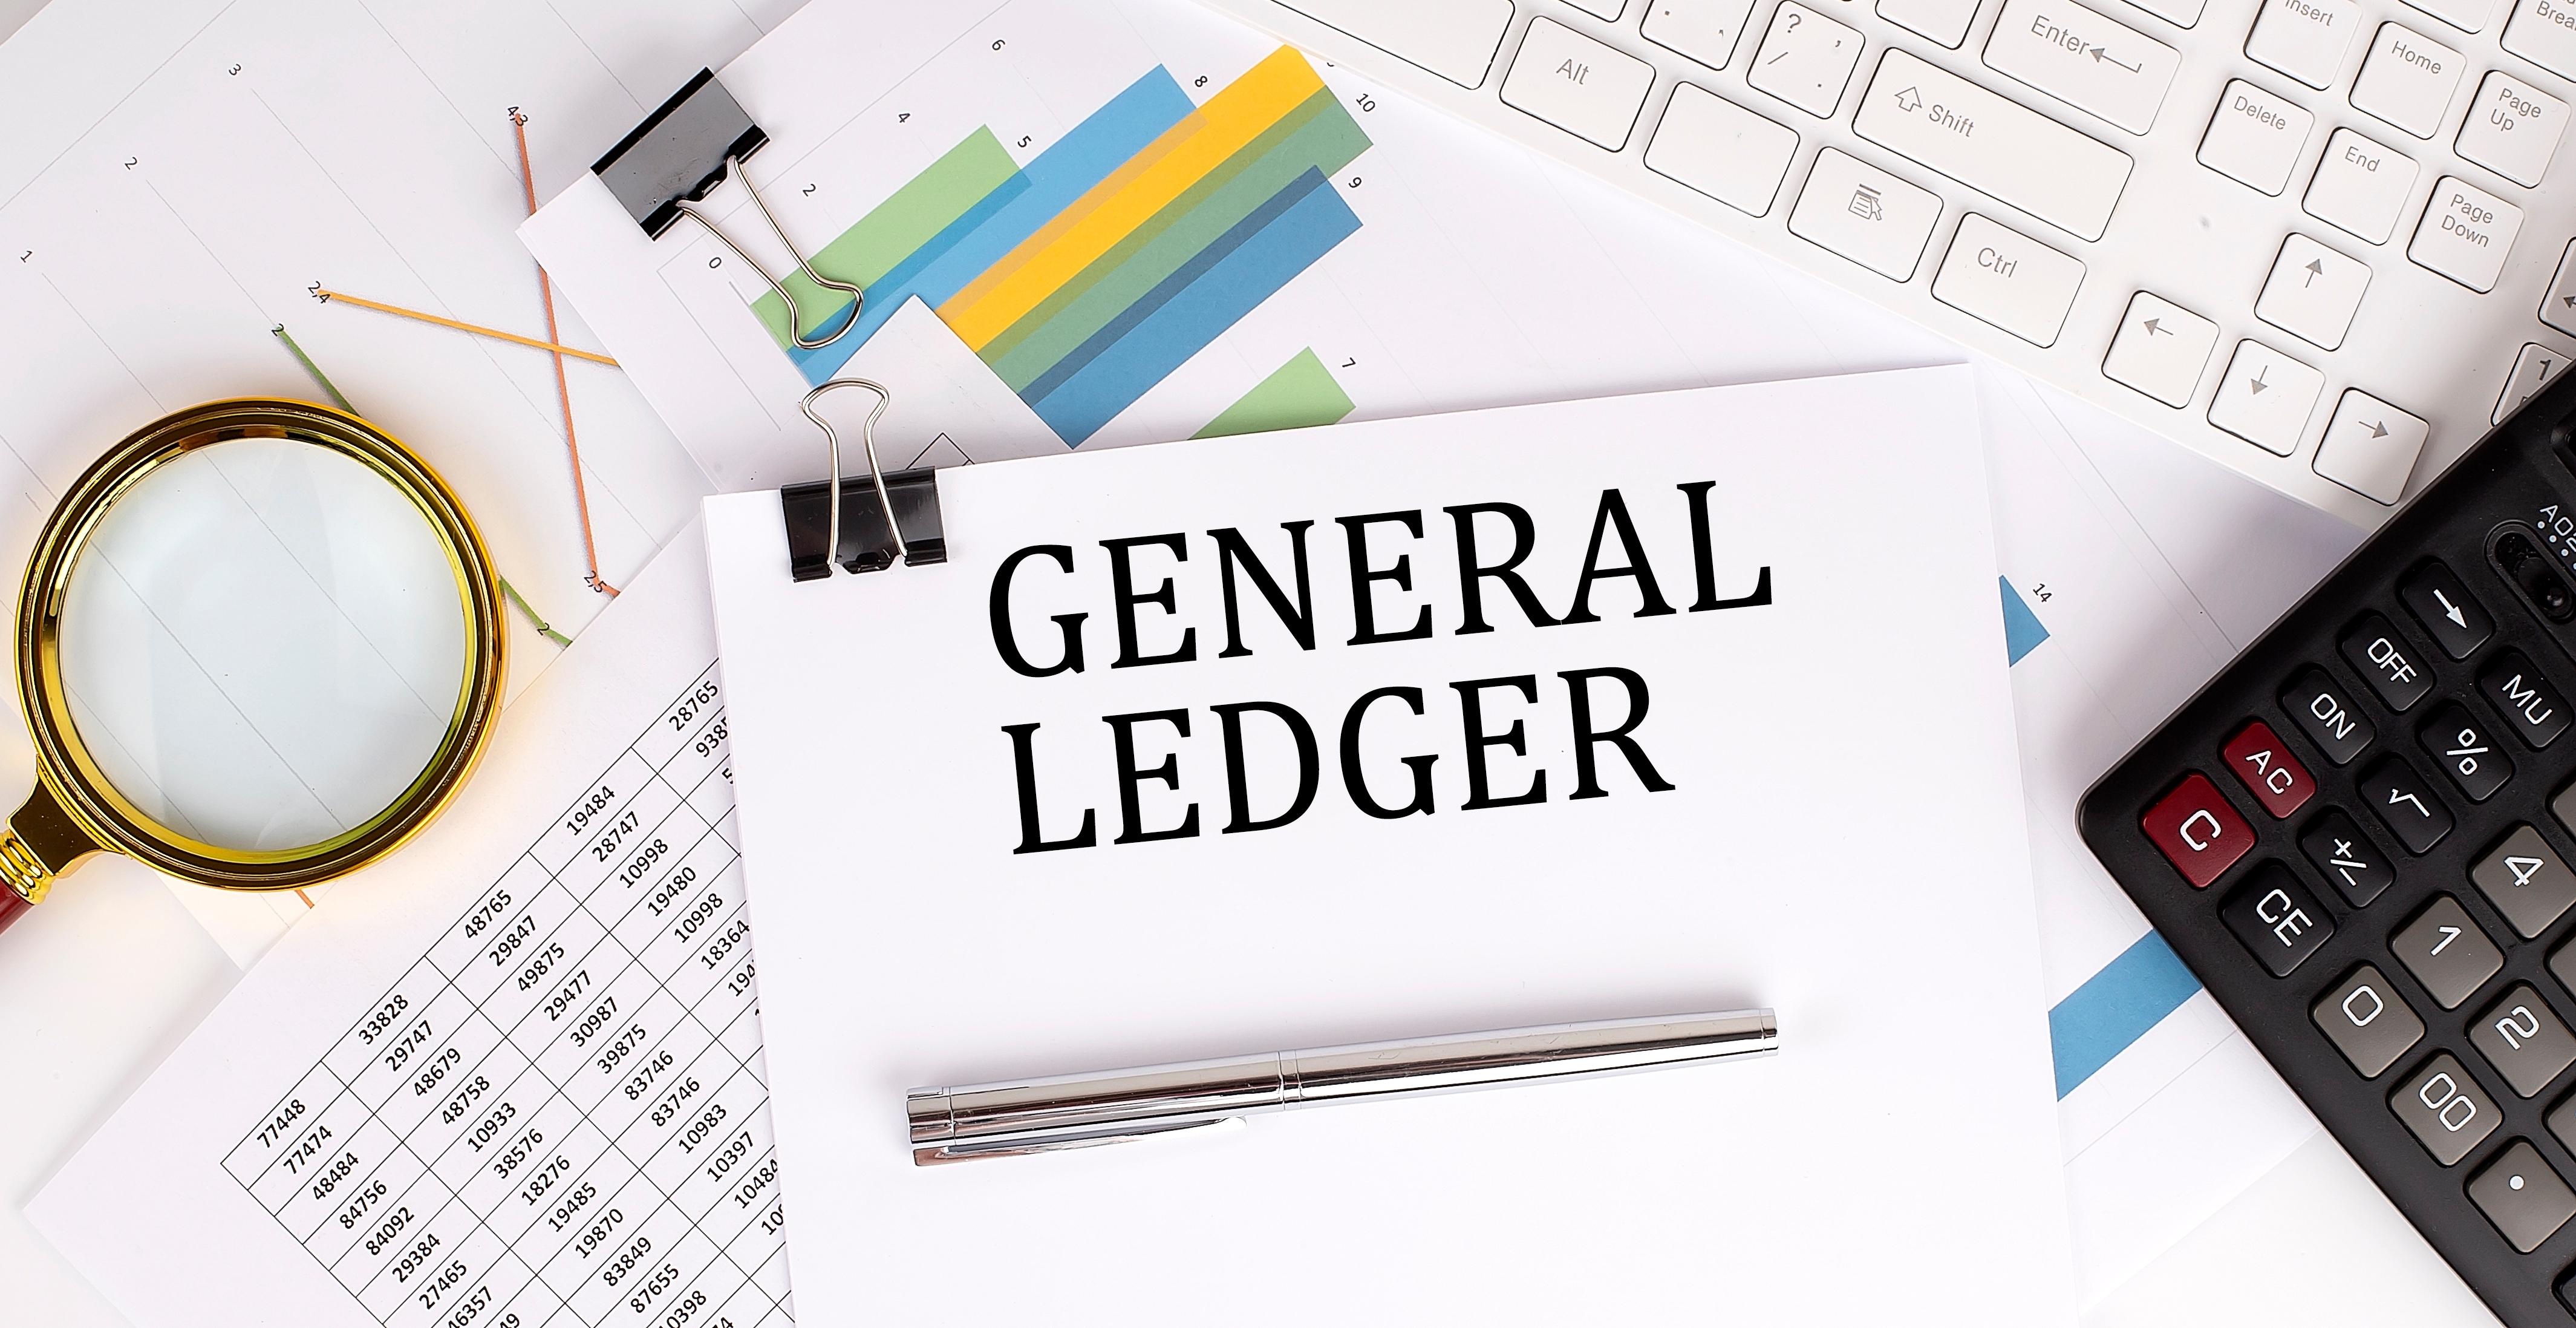 What is a General Ledger?